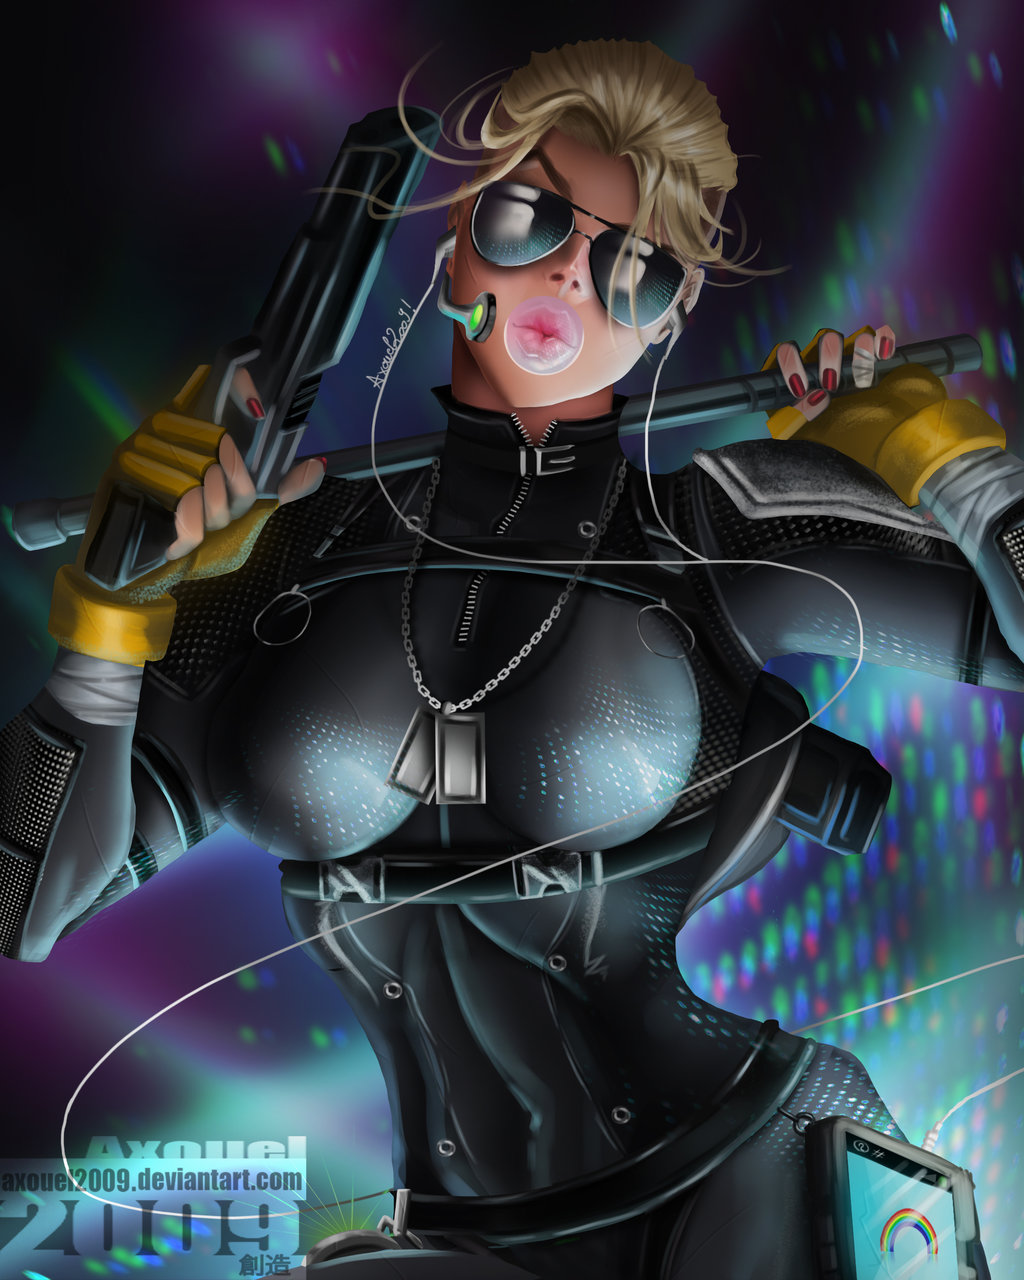 Cassie Cage Sexy Pictures